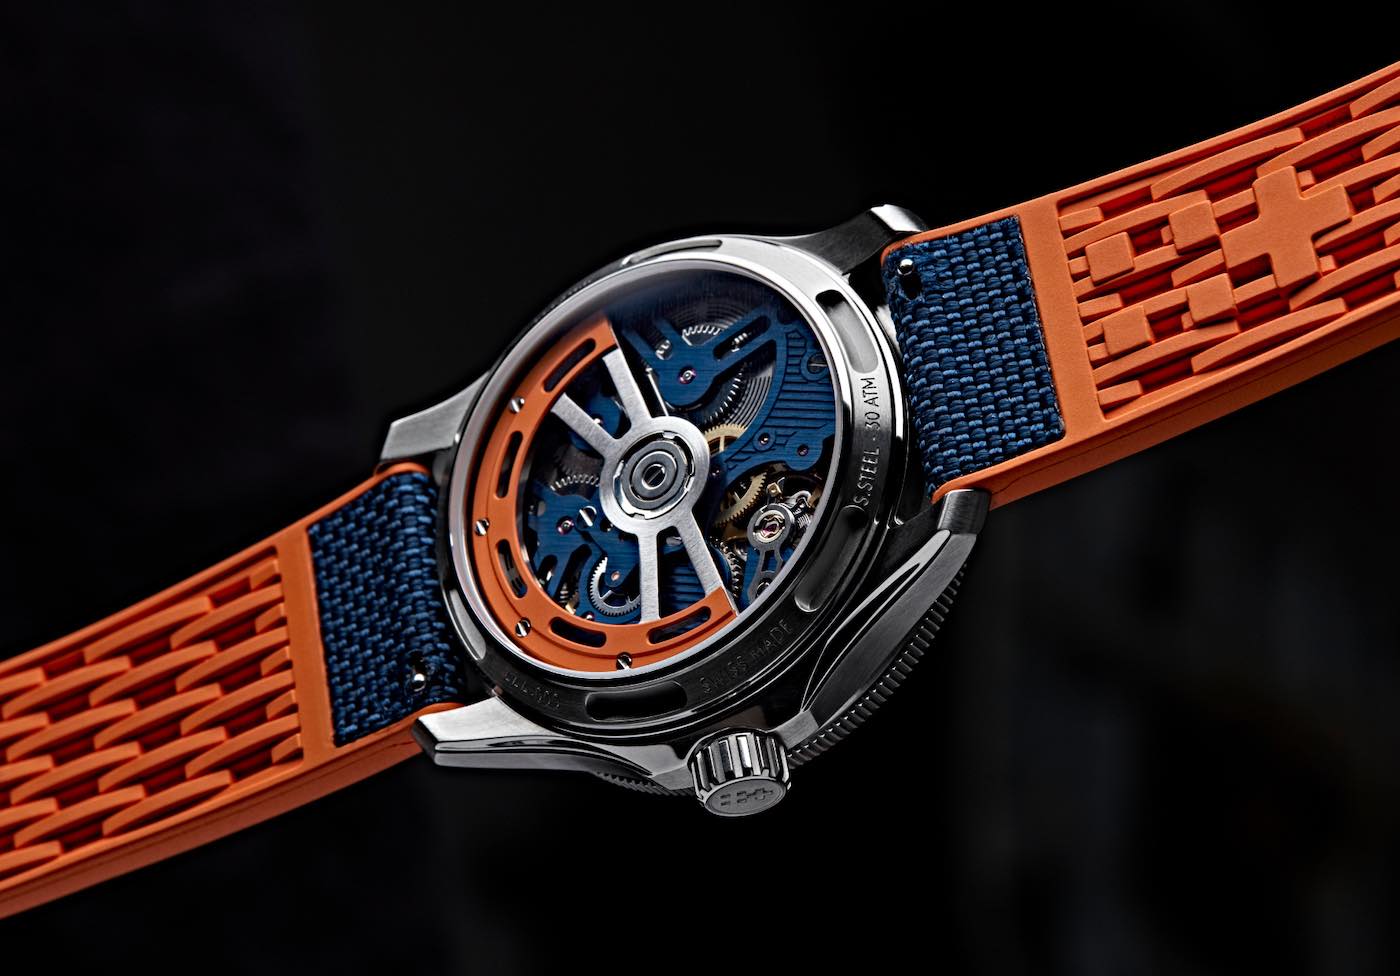 Christopher-Ward-C60-Apex-Limited-Edition-Dive-Watch